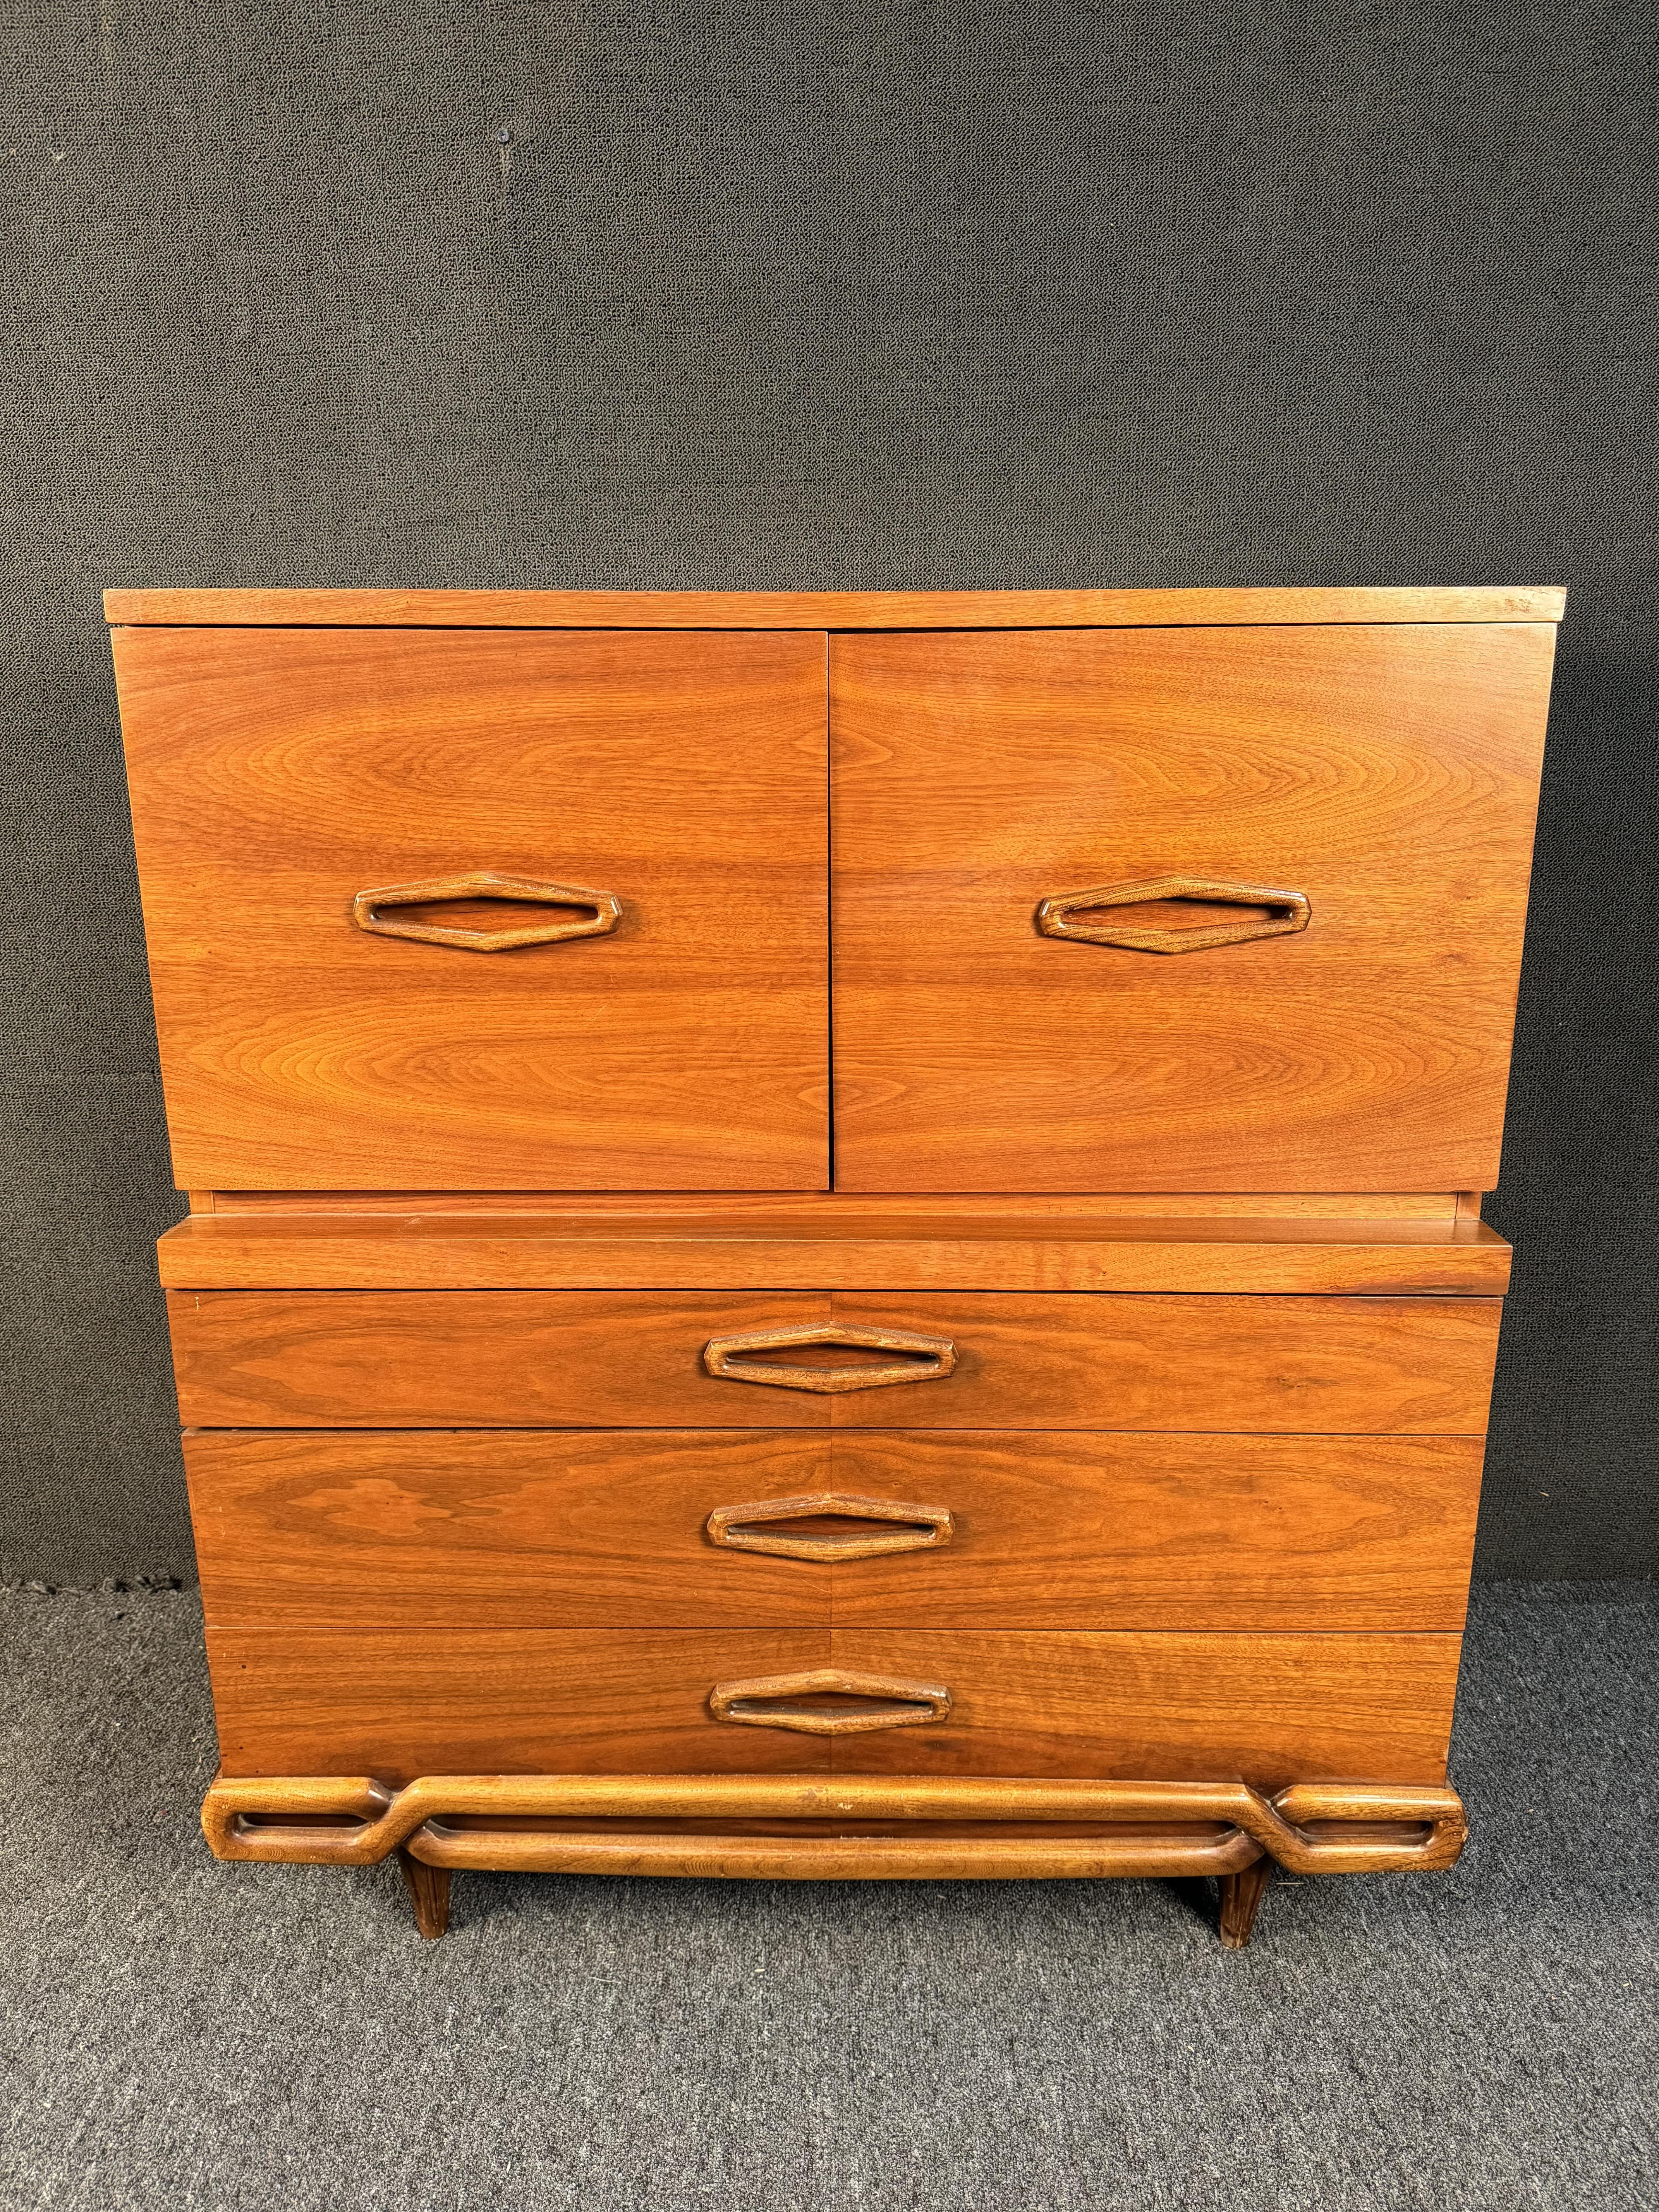 Stunning Mid-Century Modern Walnut High Dresser. Featuring beautiful protruding diamond shaped pulls, five spacious drawers, and tapered legs. Please confirm location with dealer (NY or NJ)